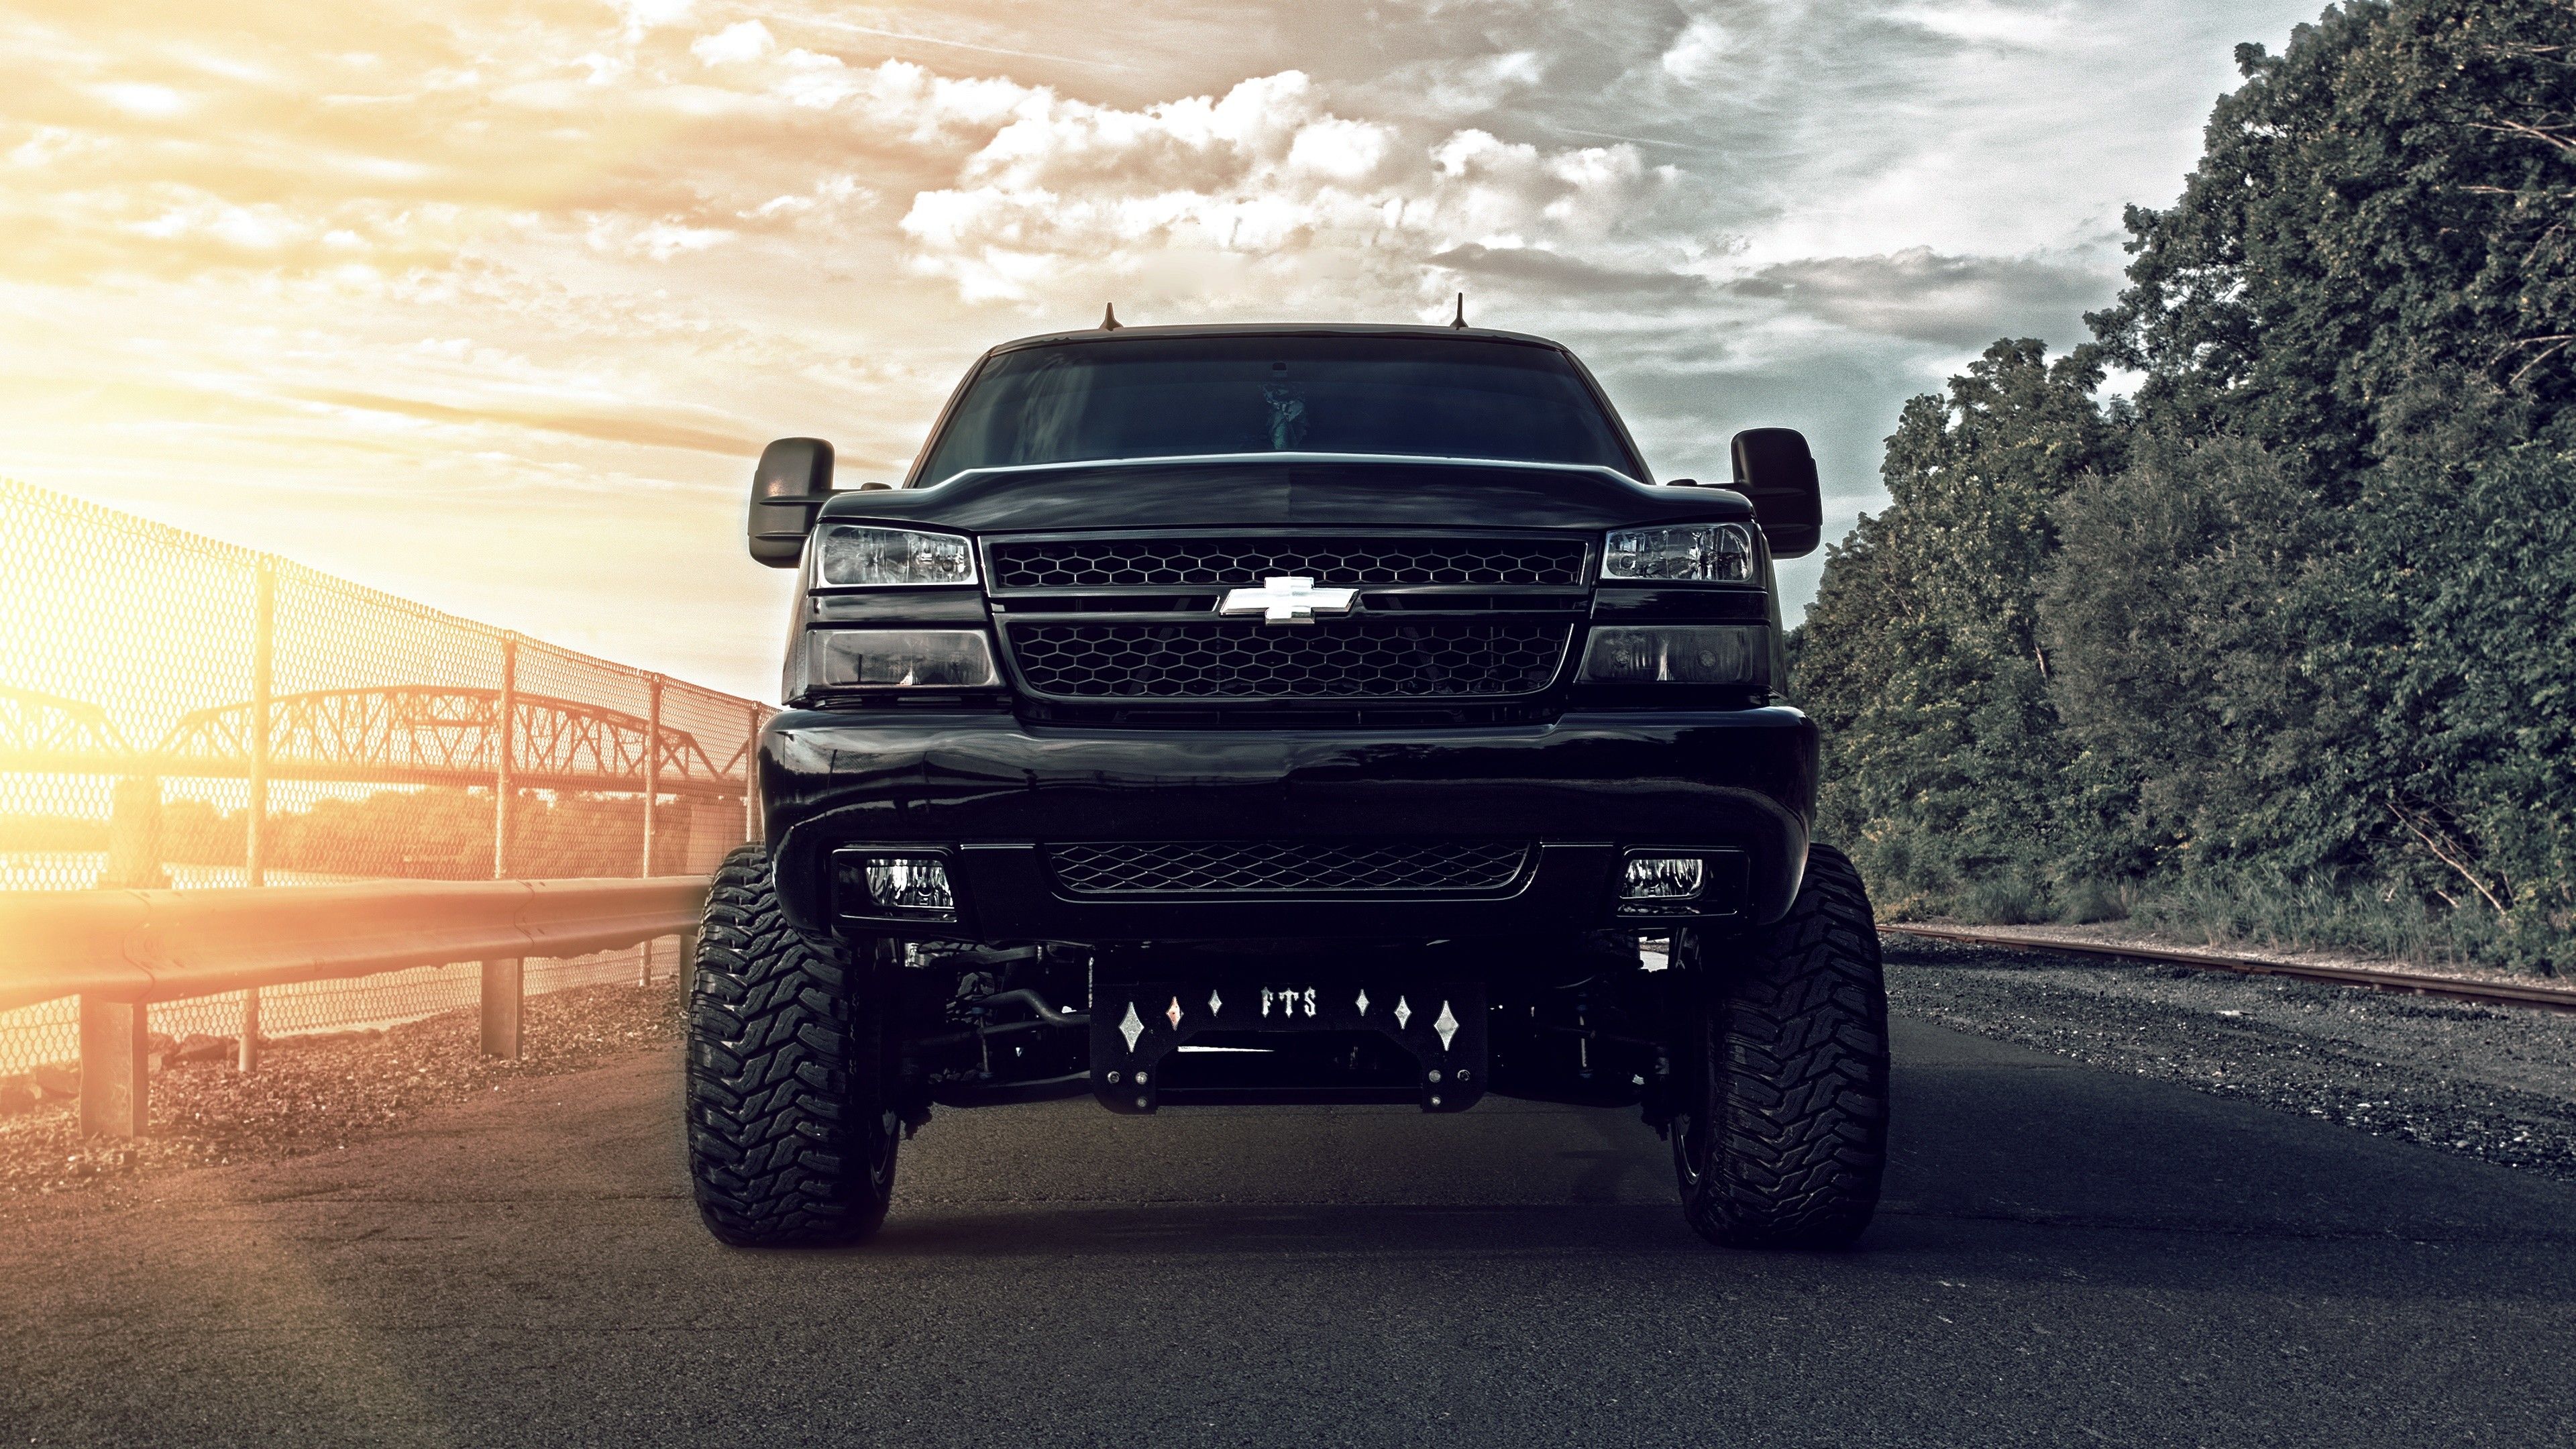 Chevy Truck Wallpapers   Top Free Chevy Truck Backgrounds